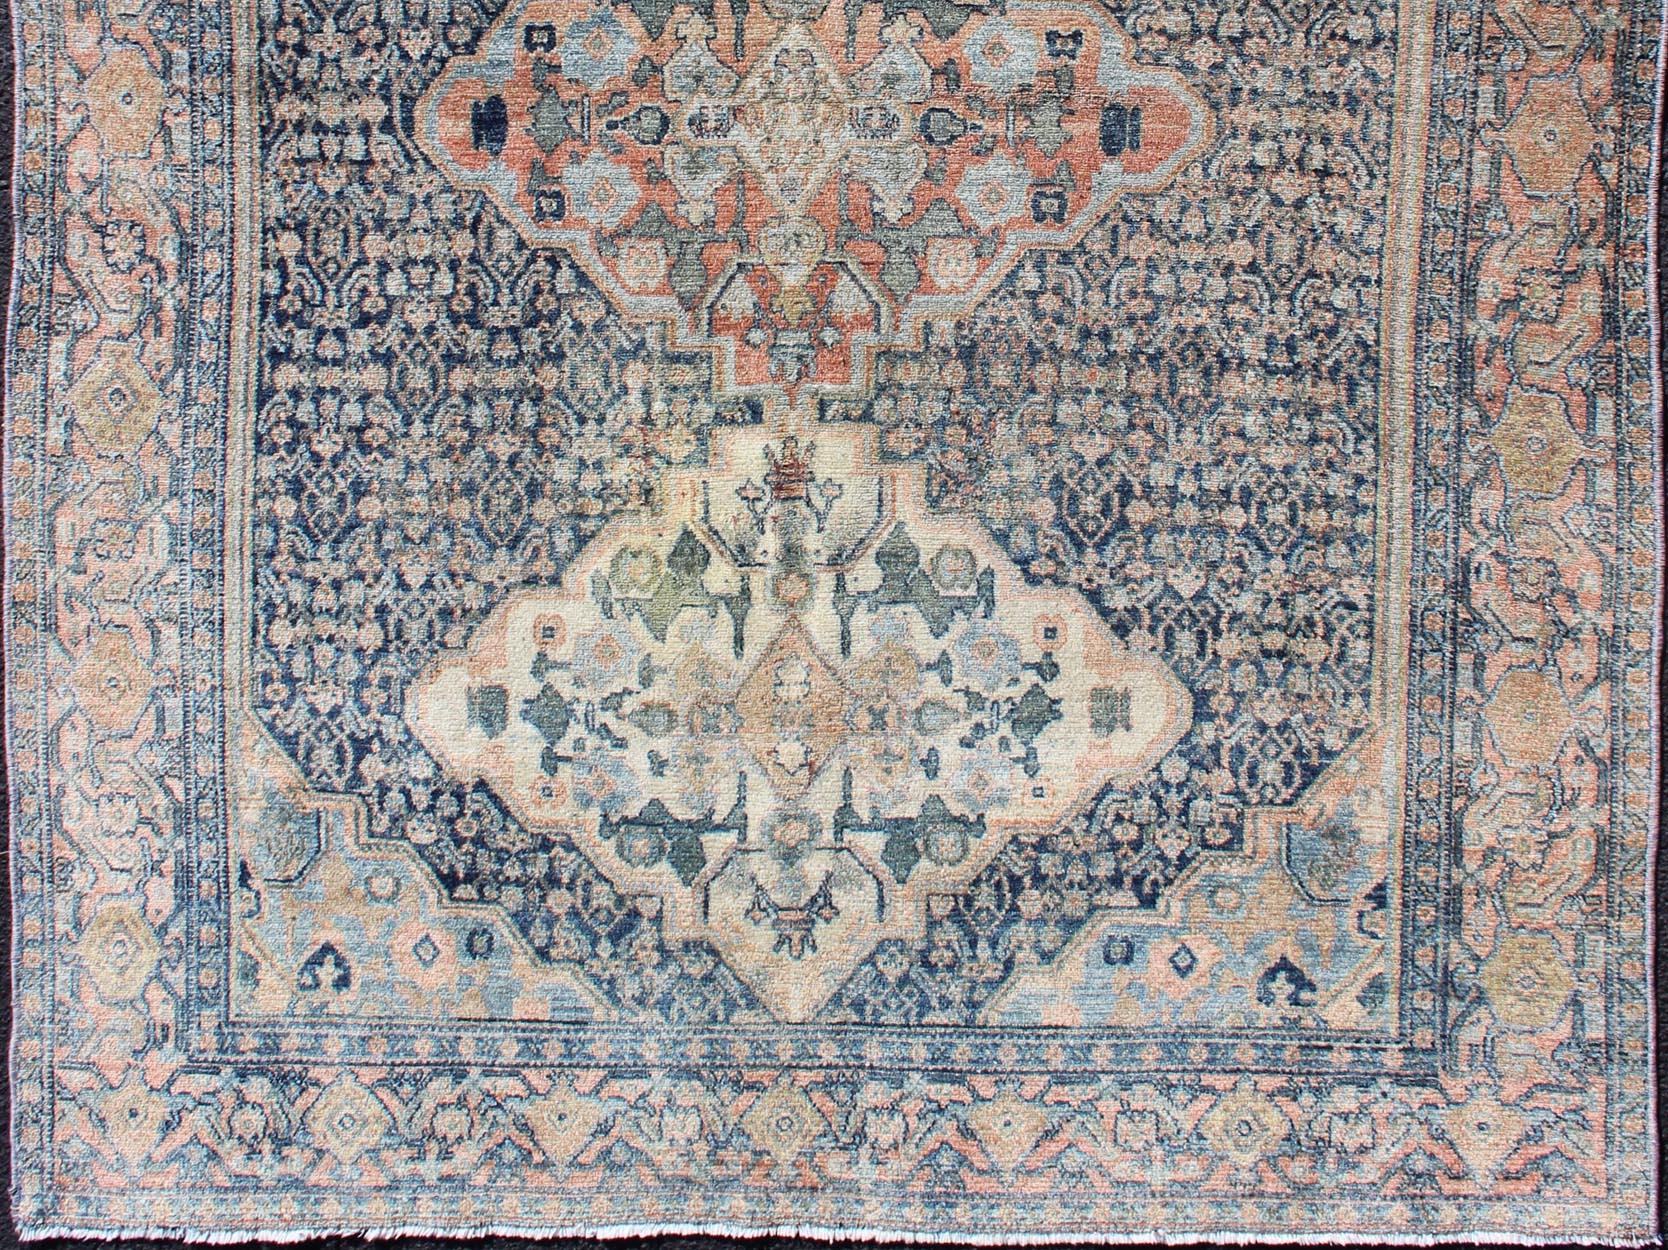 Fine Antique Persian Rug from Kurdistan region in Steel Blue Background and Multi colors. rug/D-1004, country of origin / type: Iran / Seneh, Kurdistan
Fine antique Persian Seneh rug in steel and gray blue background
This intricate and finely woven